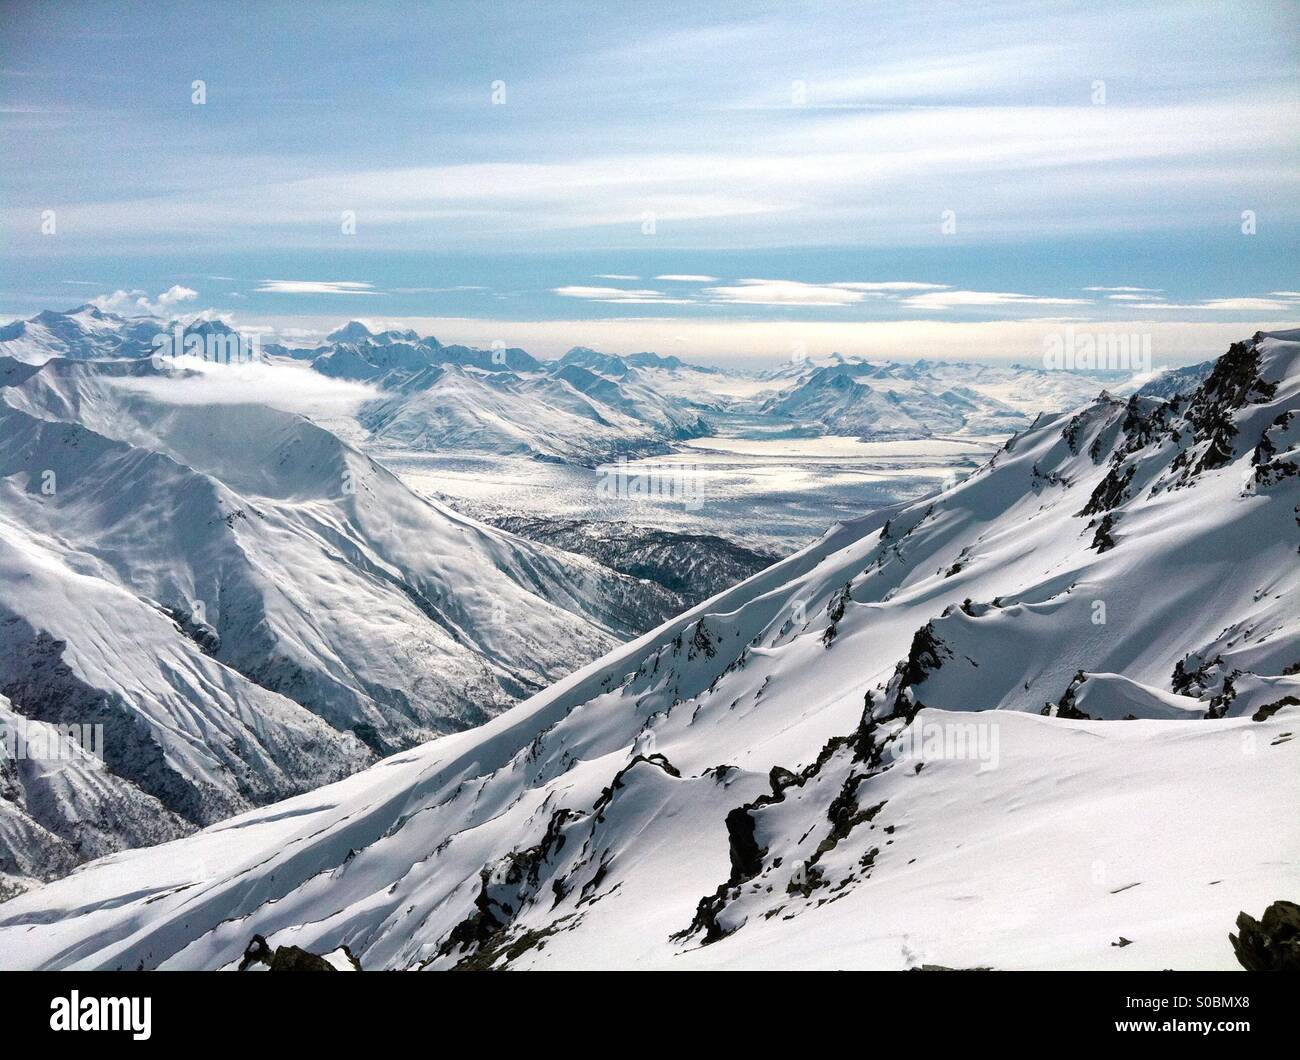 Snowy mountains in the Chugach Mountains in Alaska with Knik River and glacier. Stock Photo